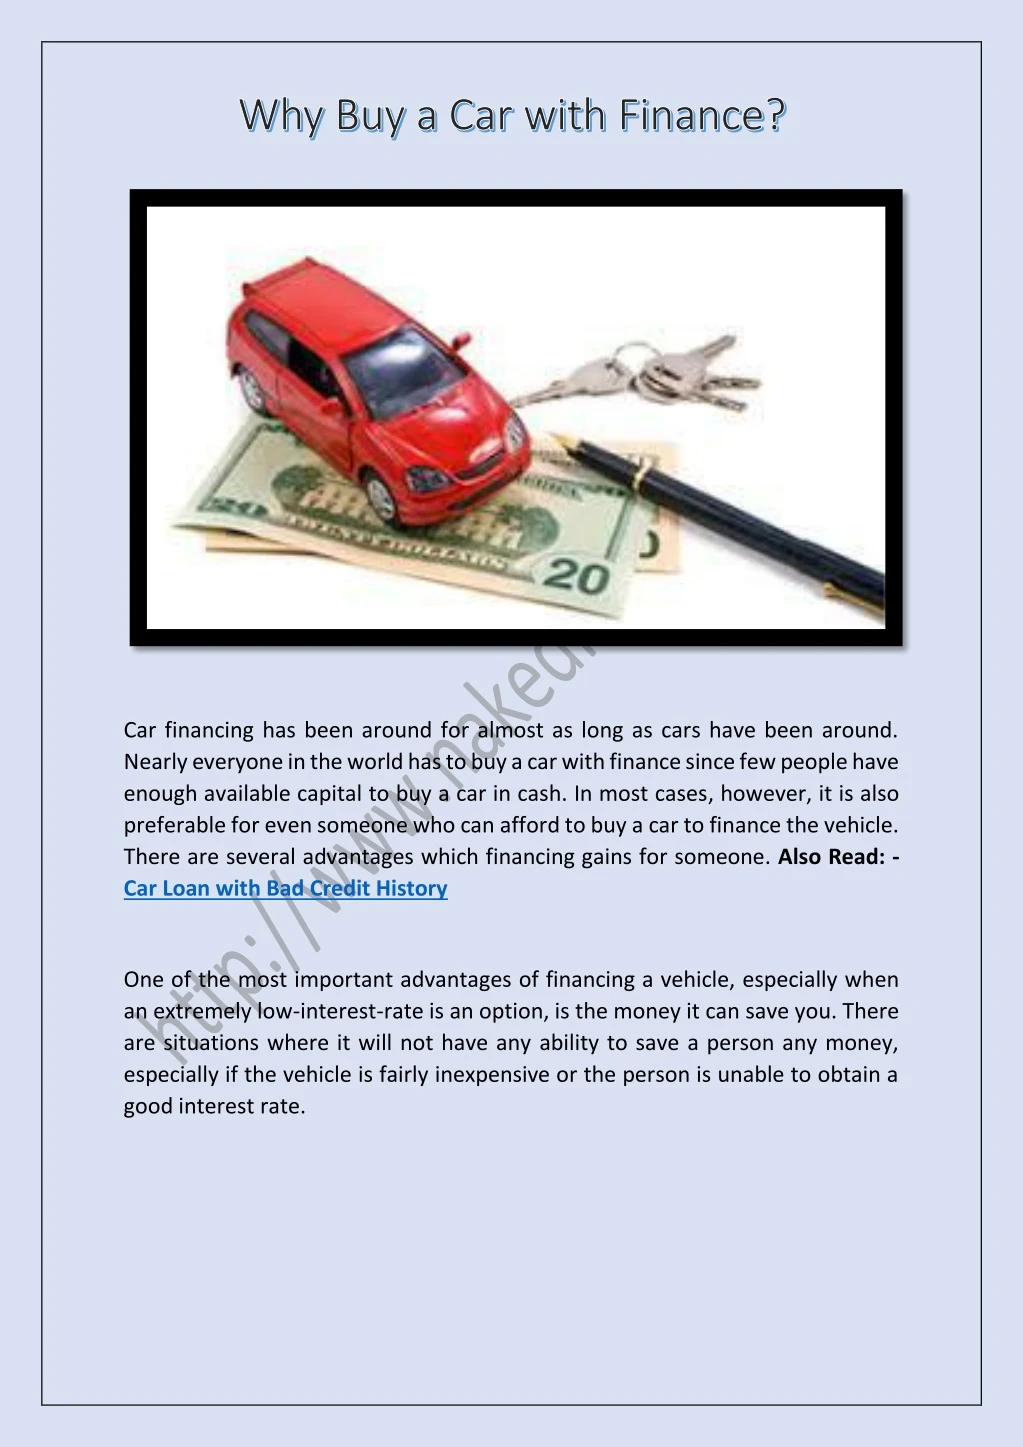 car financing has been around for almost as long